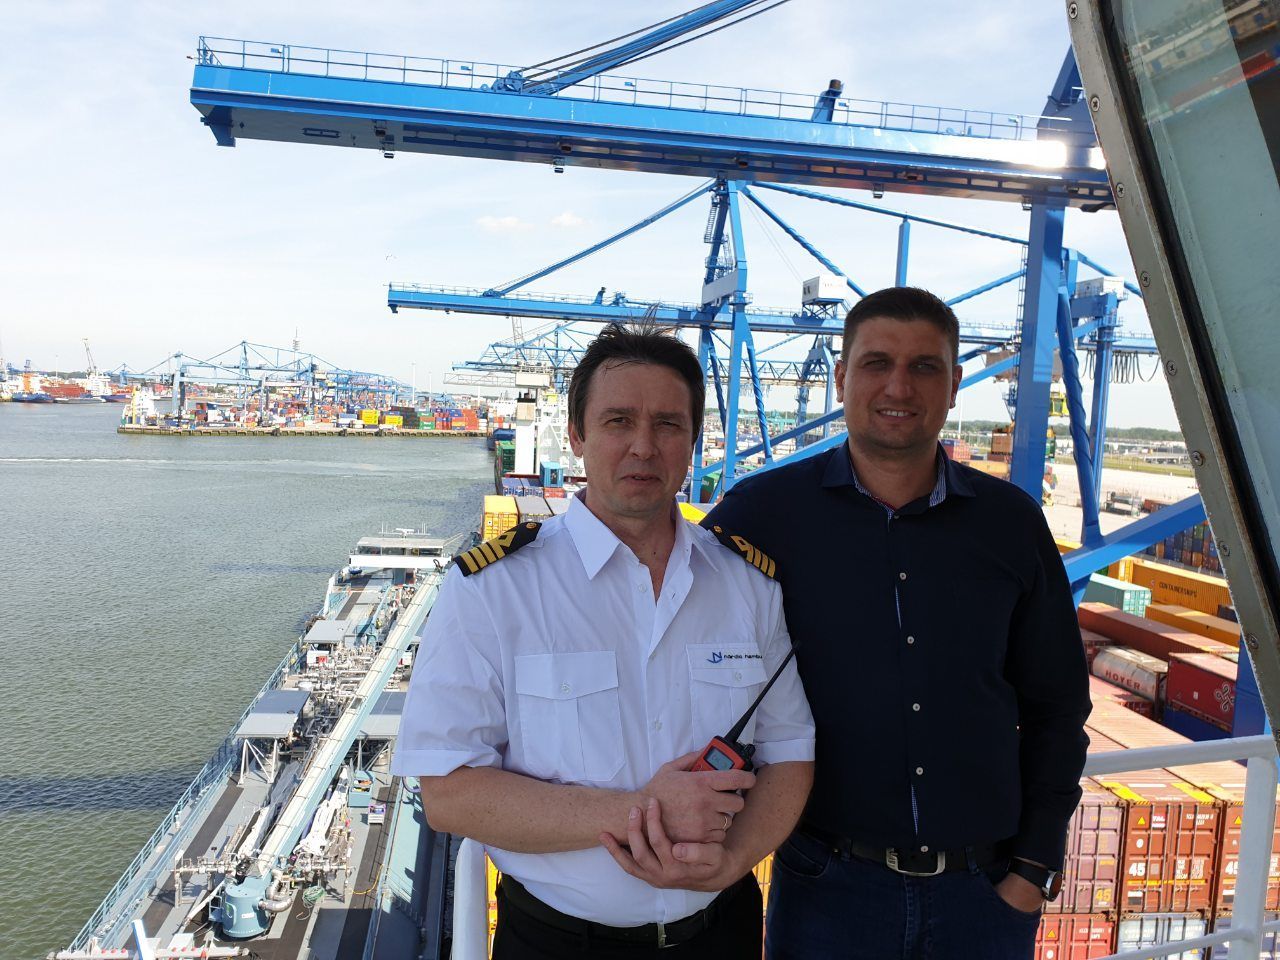 Ship's Master and coworker standing on a vessel moored at a port